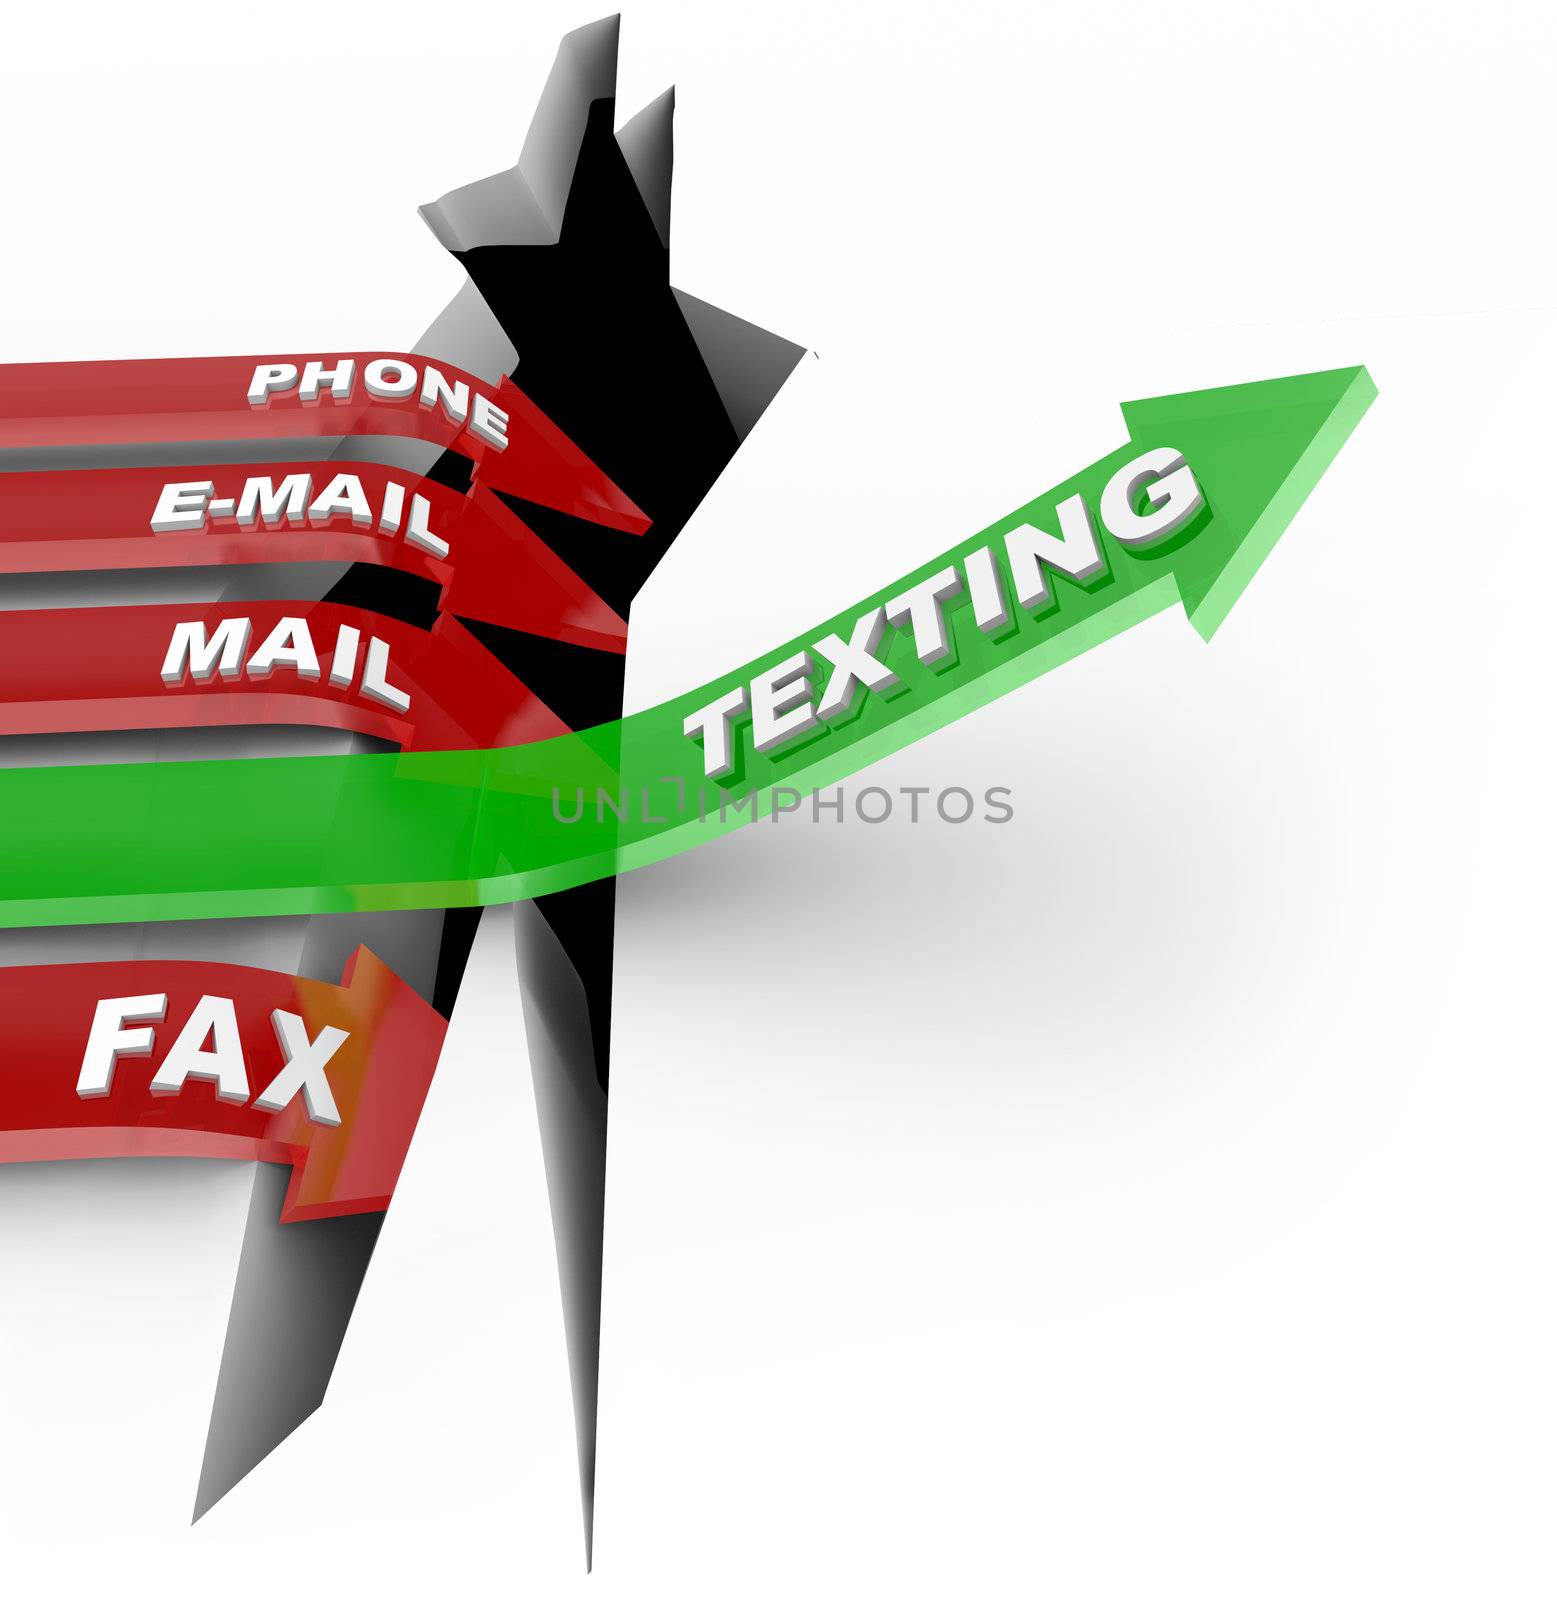 One green arrow marked Texting succeeds in jumping over a crack while the others, marked Mail, E-mail, fax and phone -- plunge, representing the decrease in these forms of communication